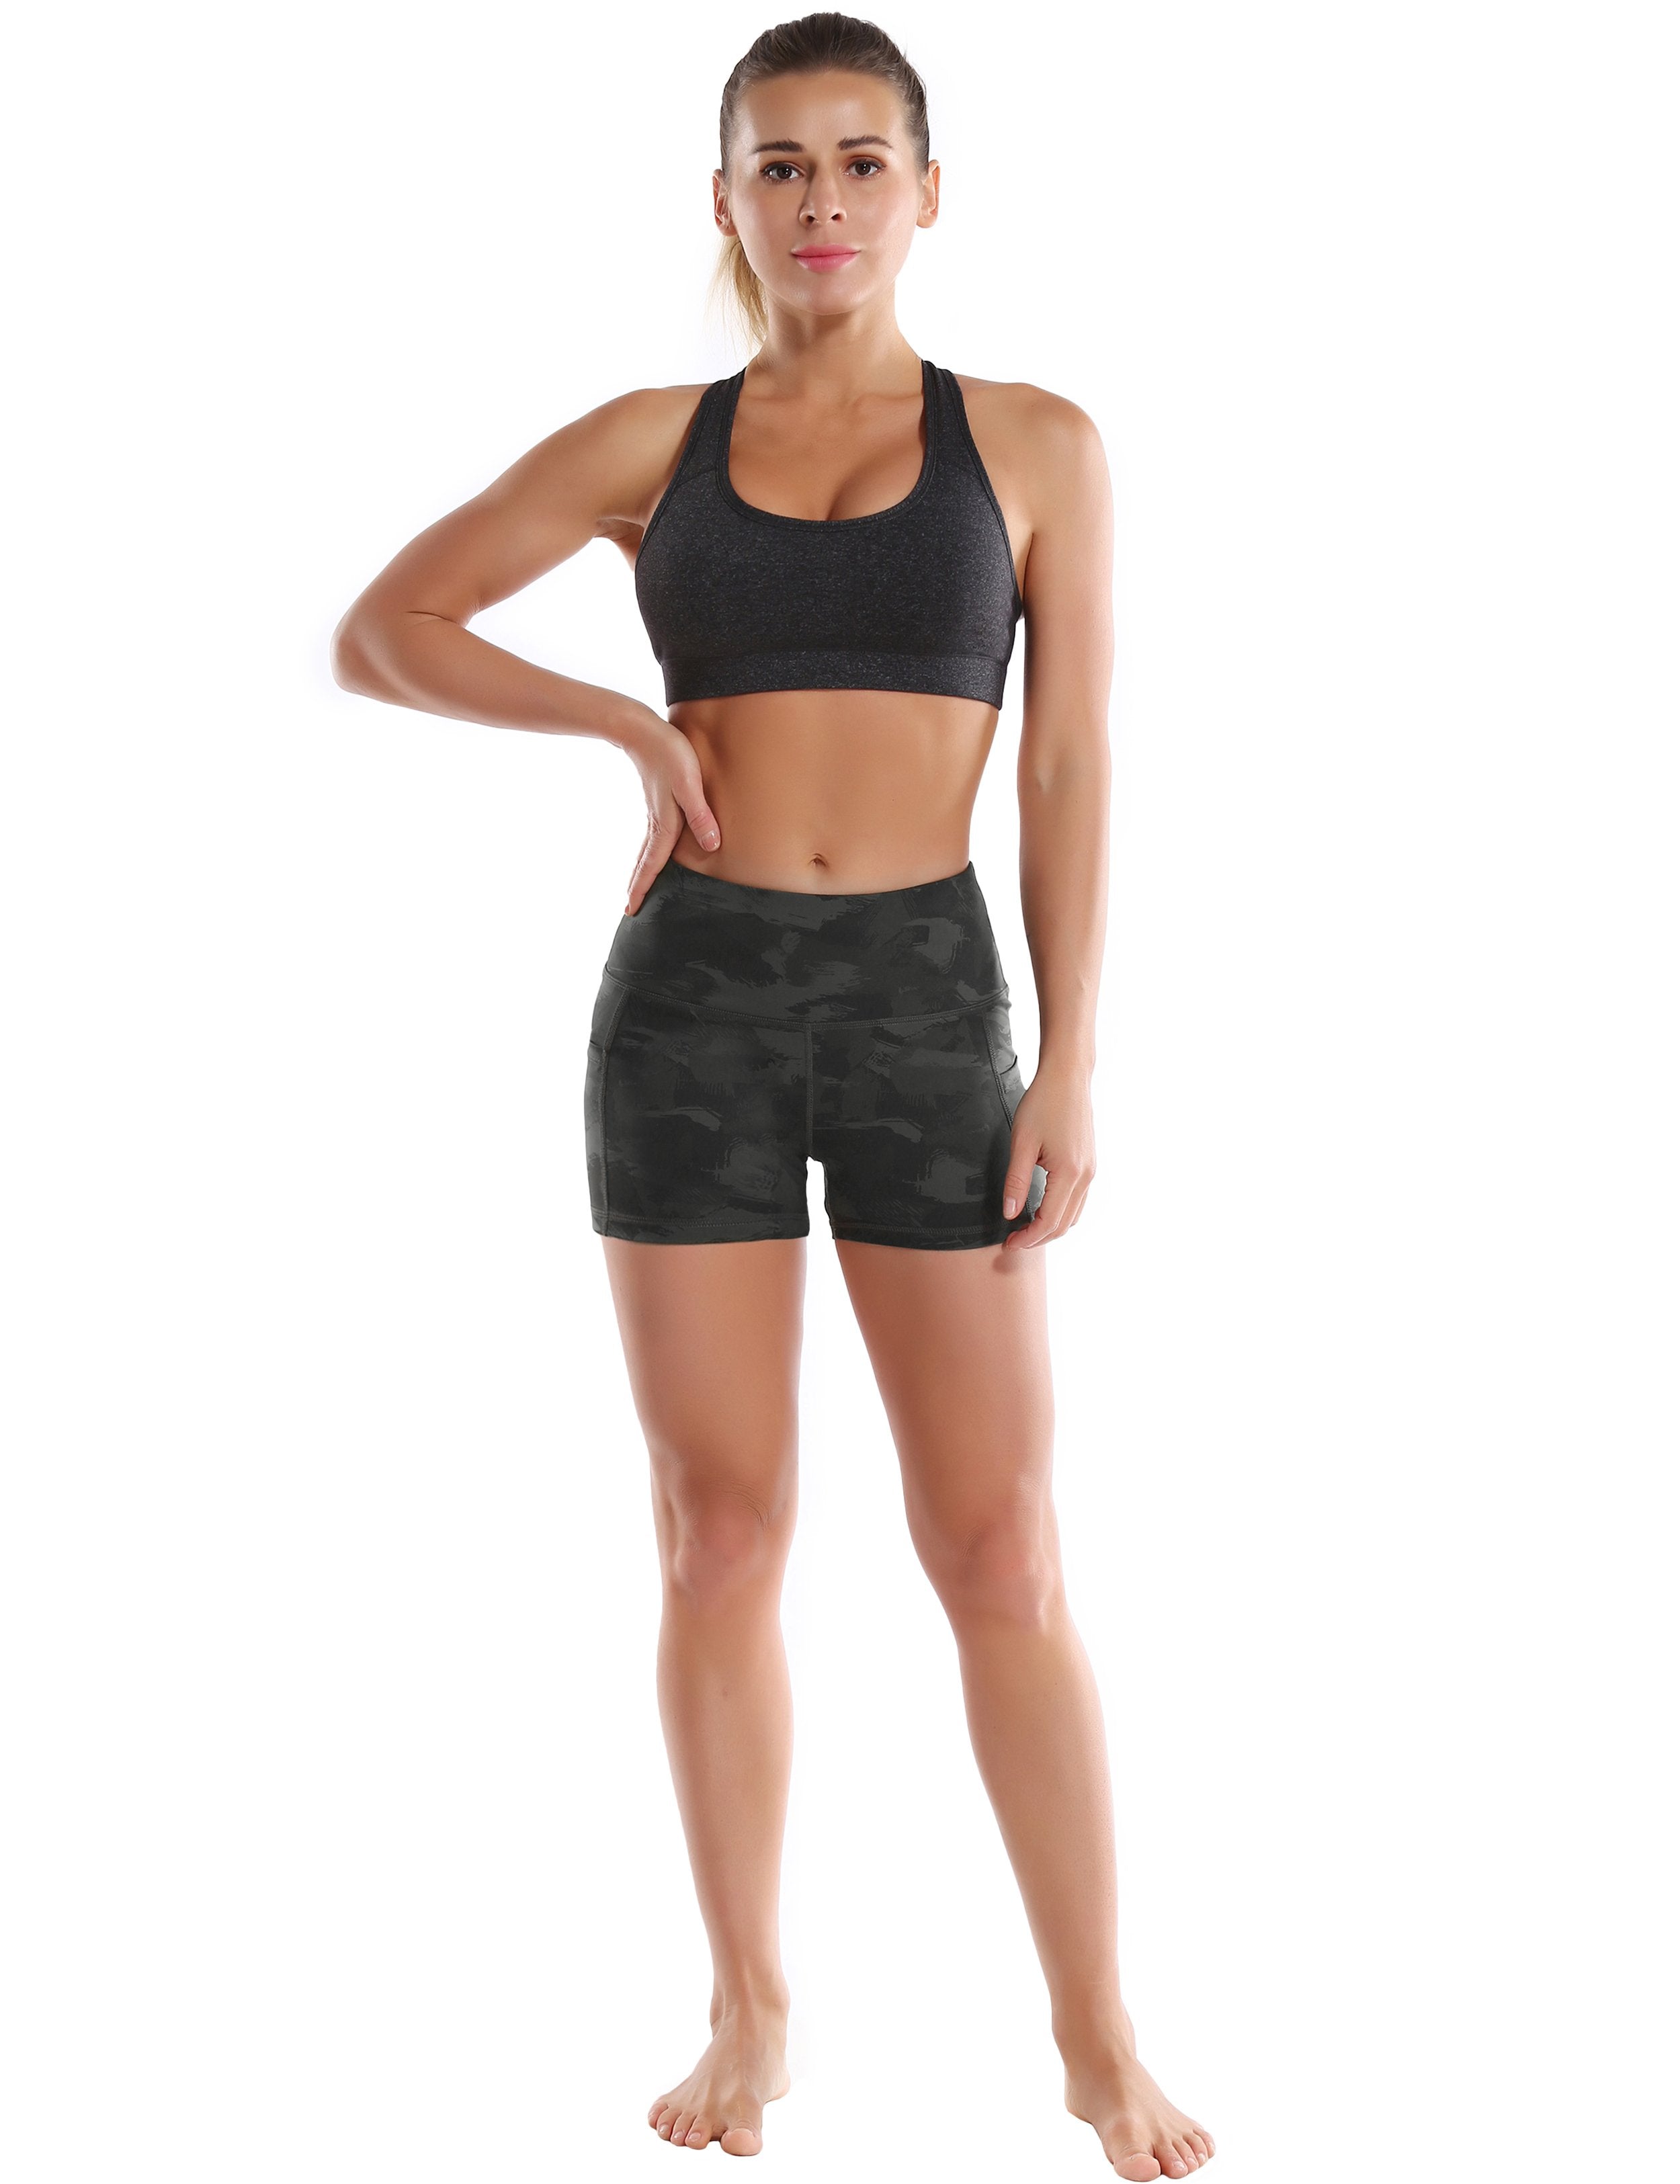 2.5" Printed Side Pockets Yoga Shorts dimgray brushcamo Sleek, soft, smooth and totally comfortable: our newest sexy style is here. Softest-ever fabric High elasticity High density 4-way stretch Fabric doesn't attract lint easily No see-through Moisture-wicking Machine wash 78% Polyester, 22% Spandex